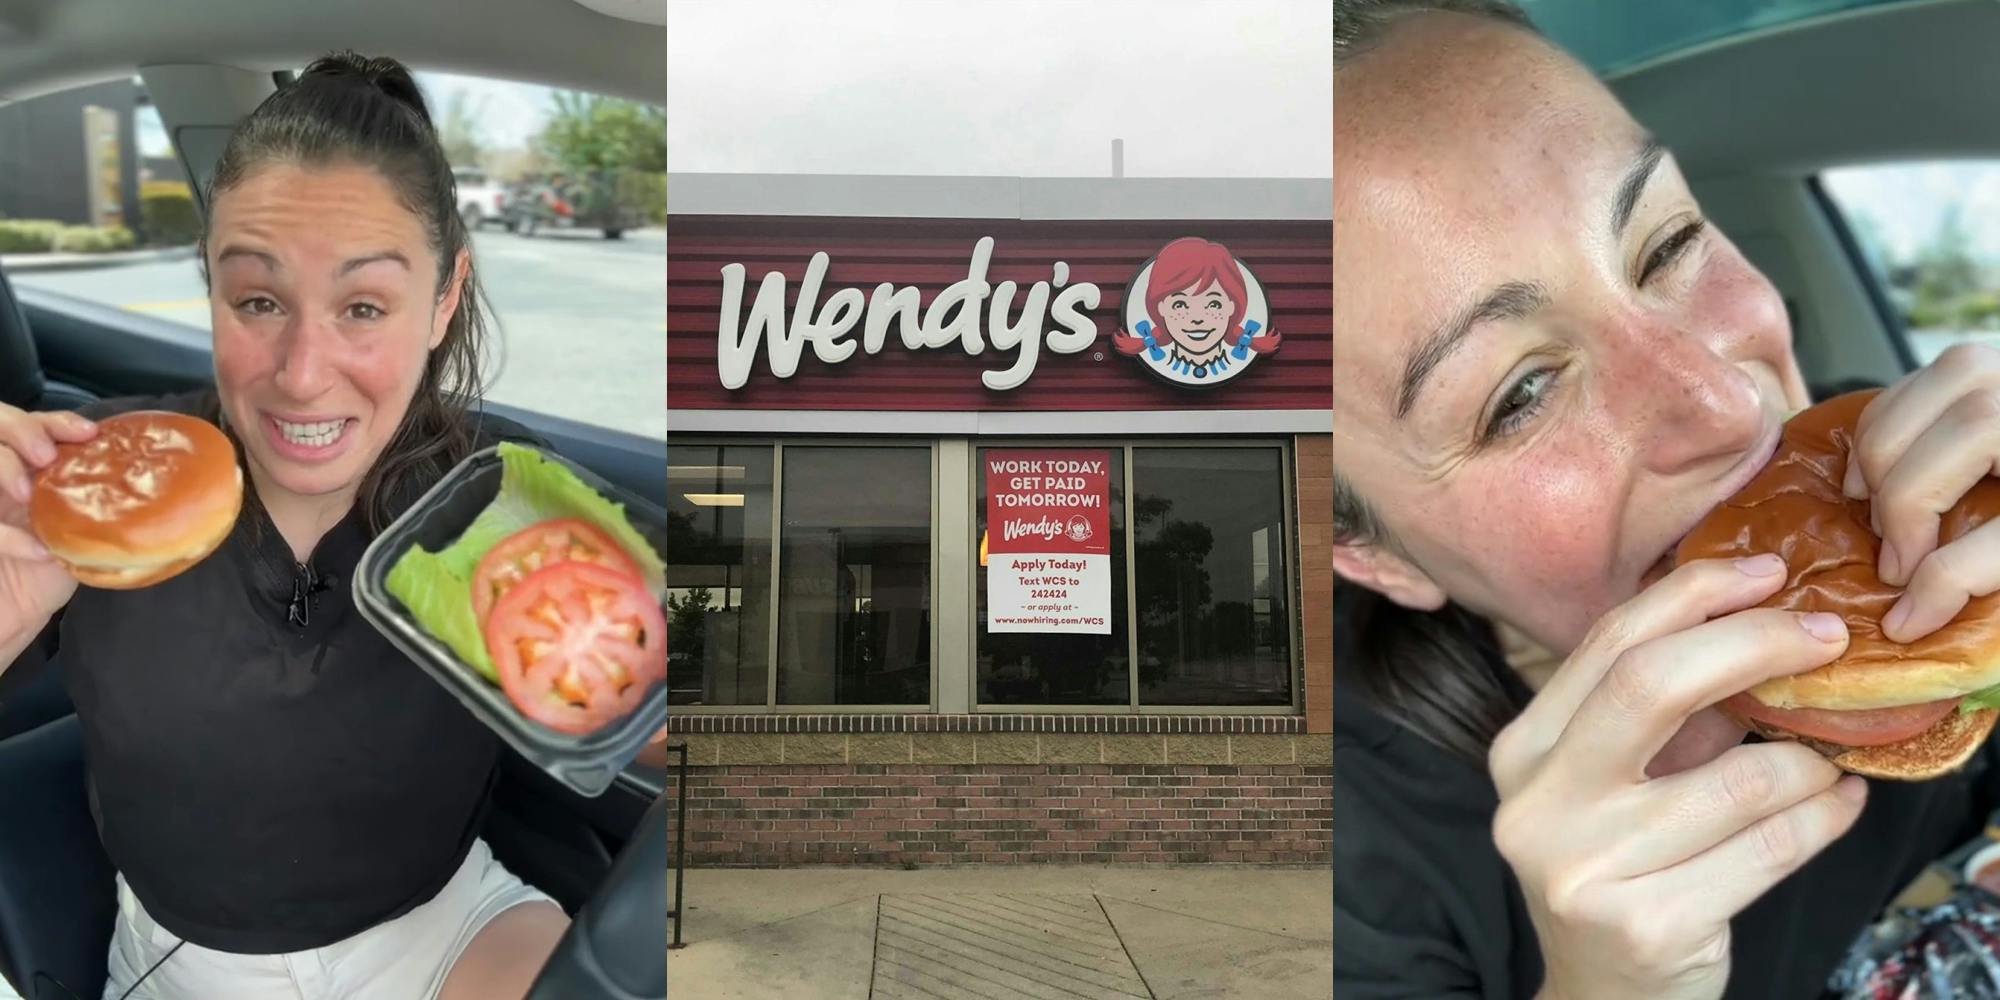 ‘Stop getting ripped off’: Wendy’s customer says customer have been getting ripped off after discovering way to order burger for $2